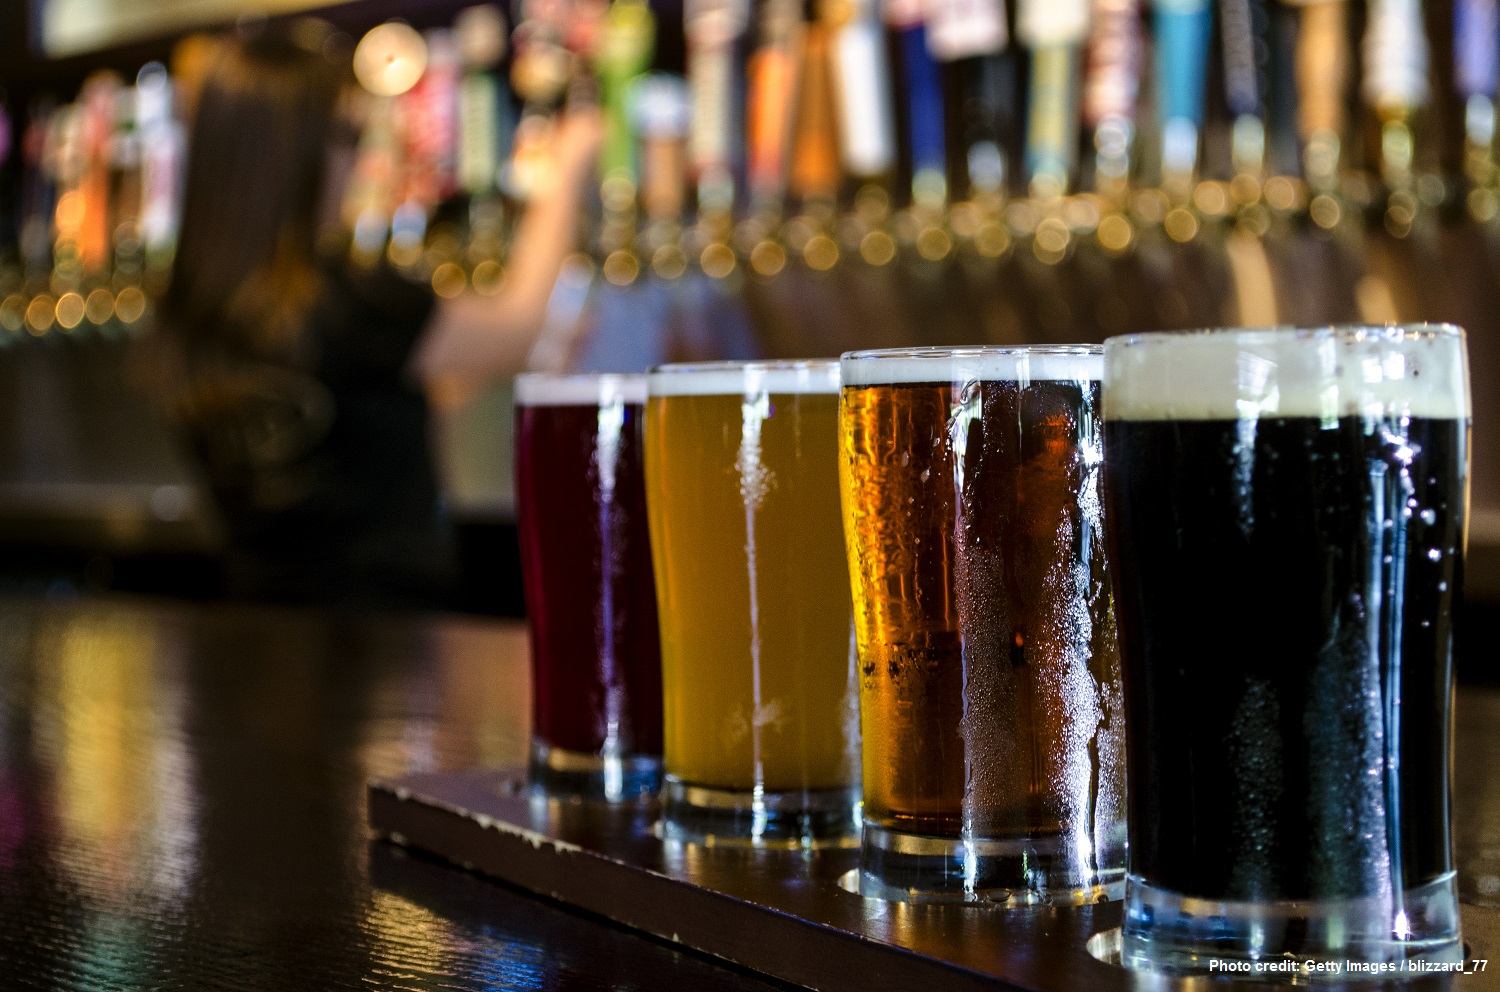 Several processes that are easy to be infected with bacteria in the process of beer brewing